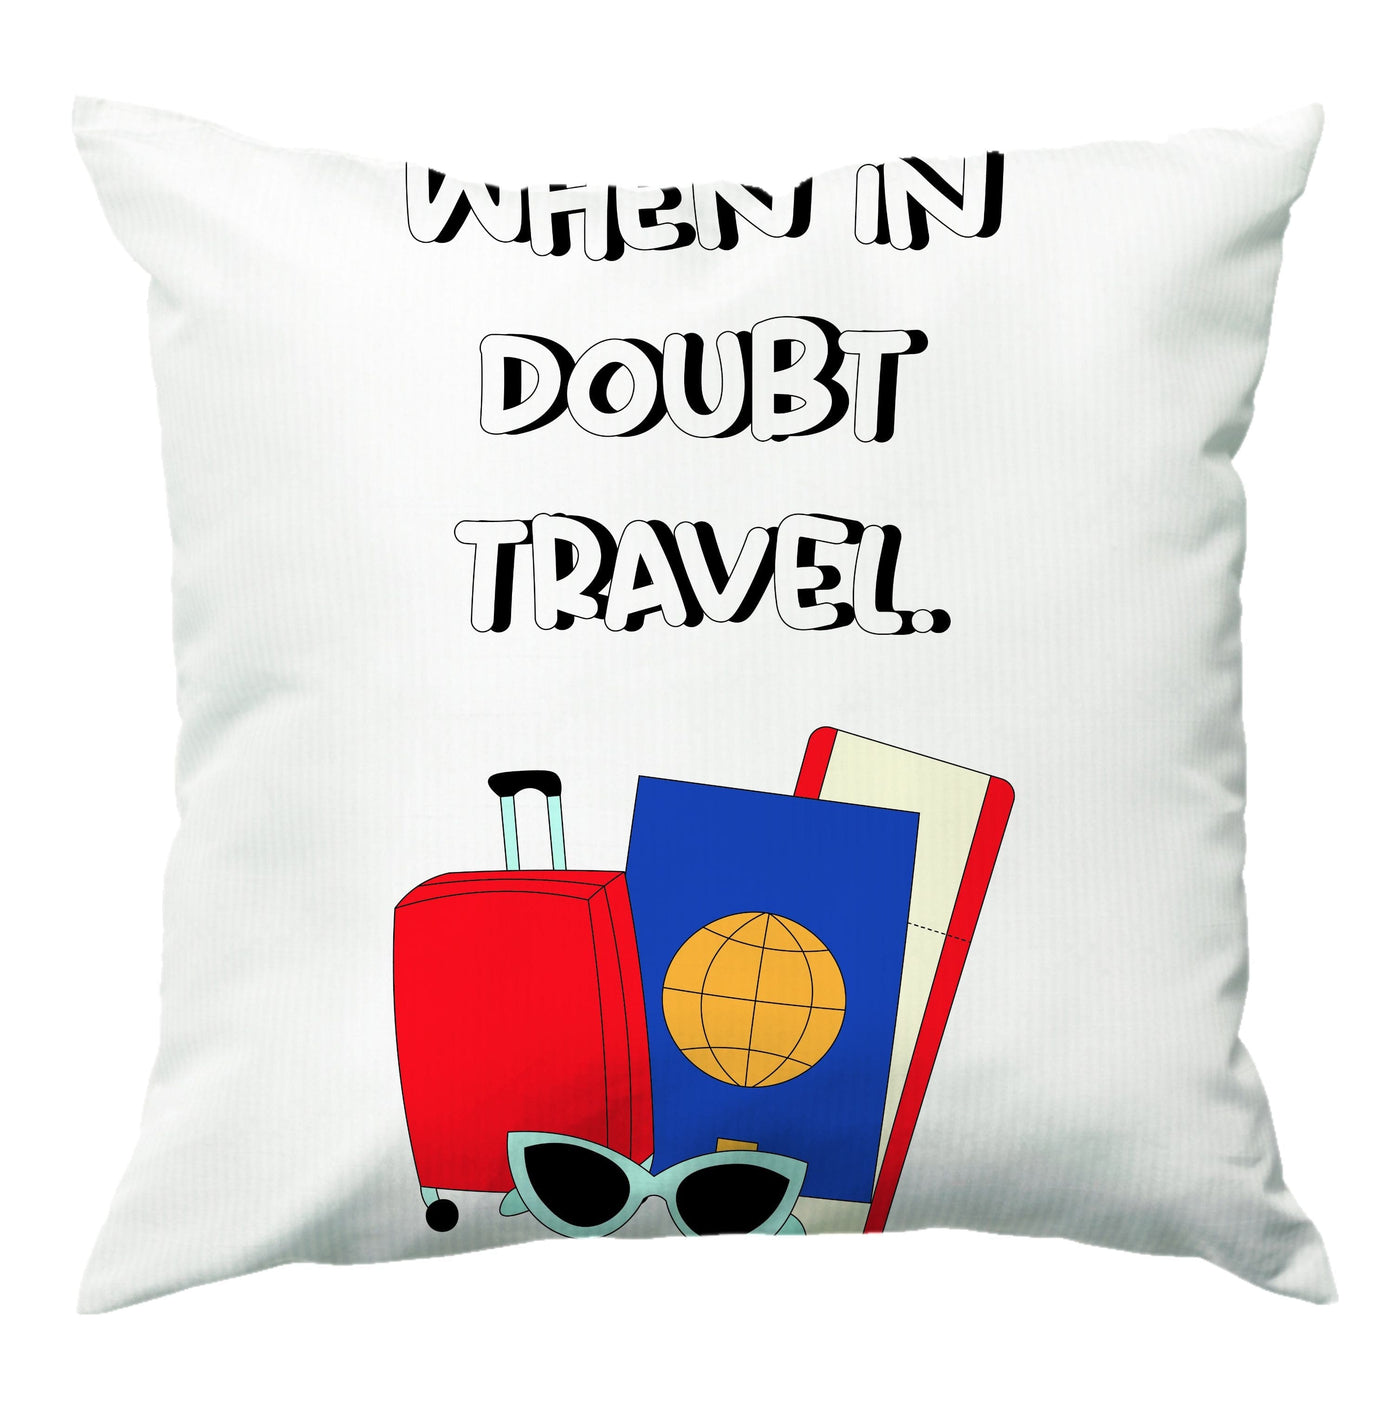 When In Doubt Travel - Travel Cushion